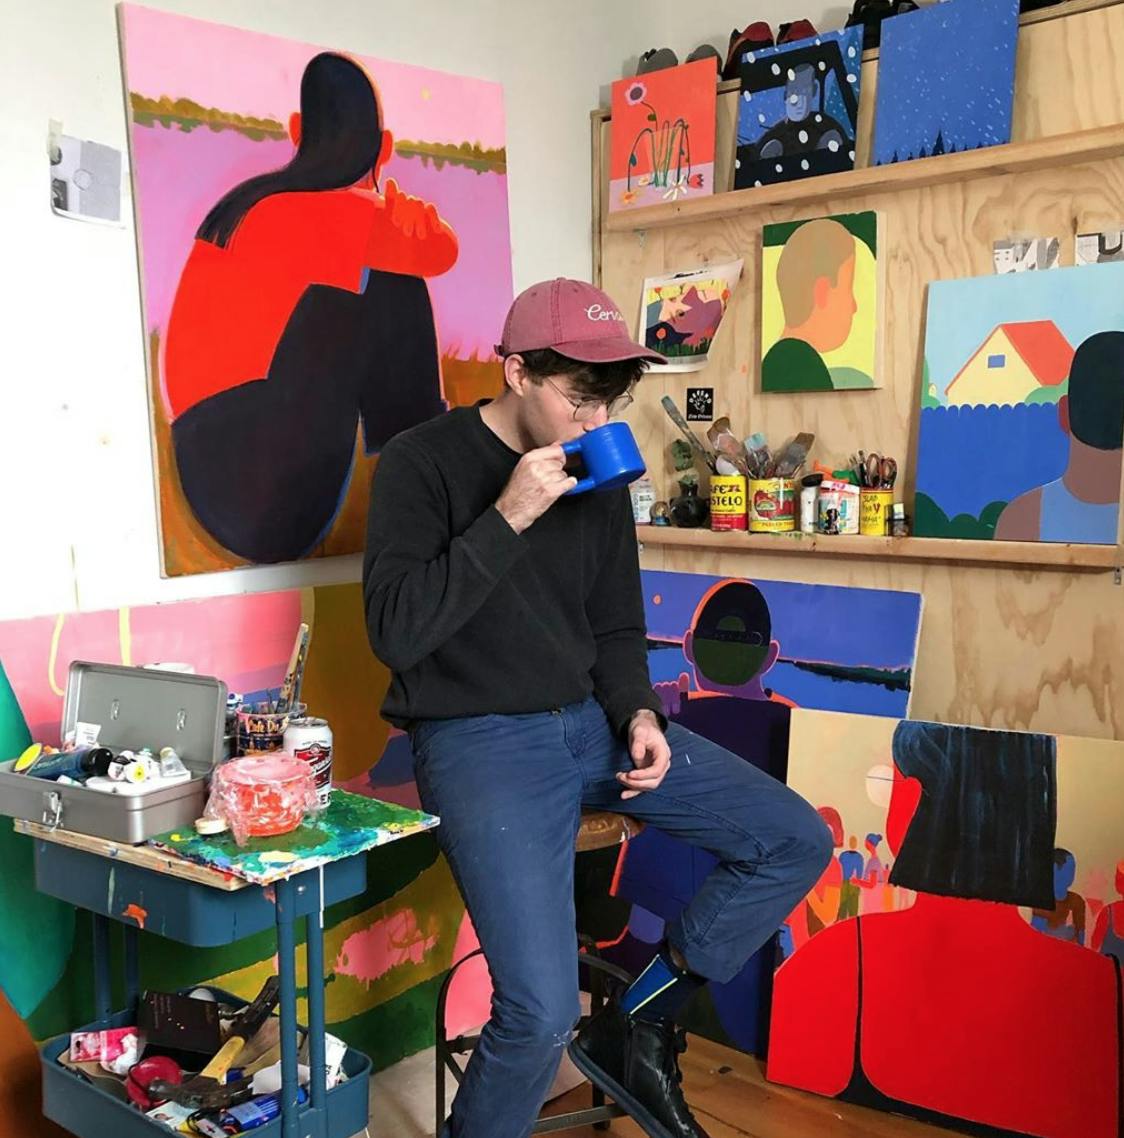 Artist Jackson Joyce surrounded by his paintings in the studio drinking coffee from a blue mug.